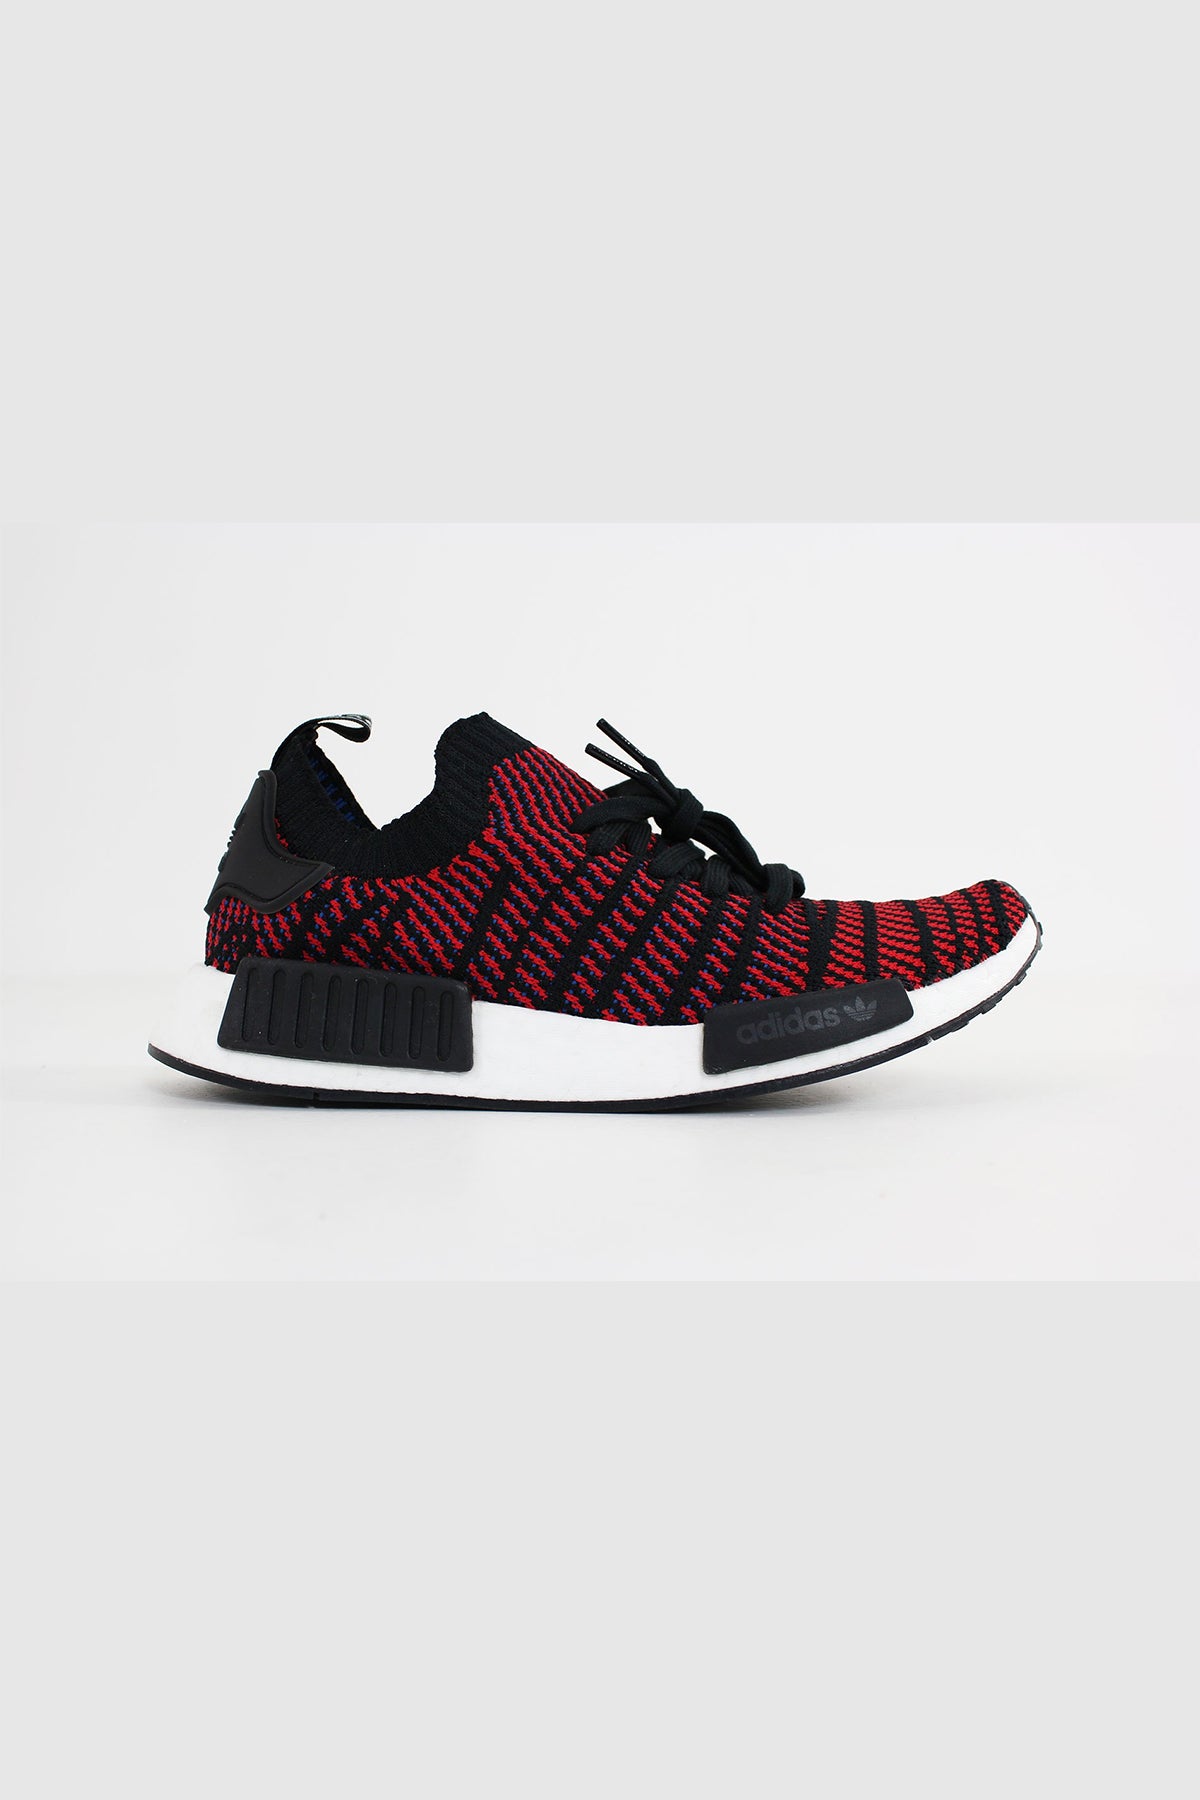 adidas nmd bordeaux rot